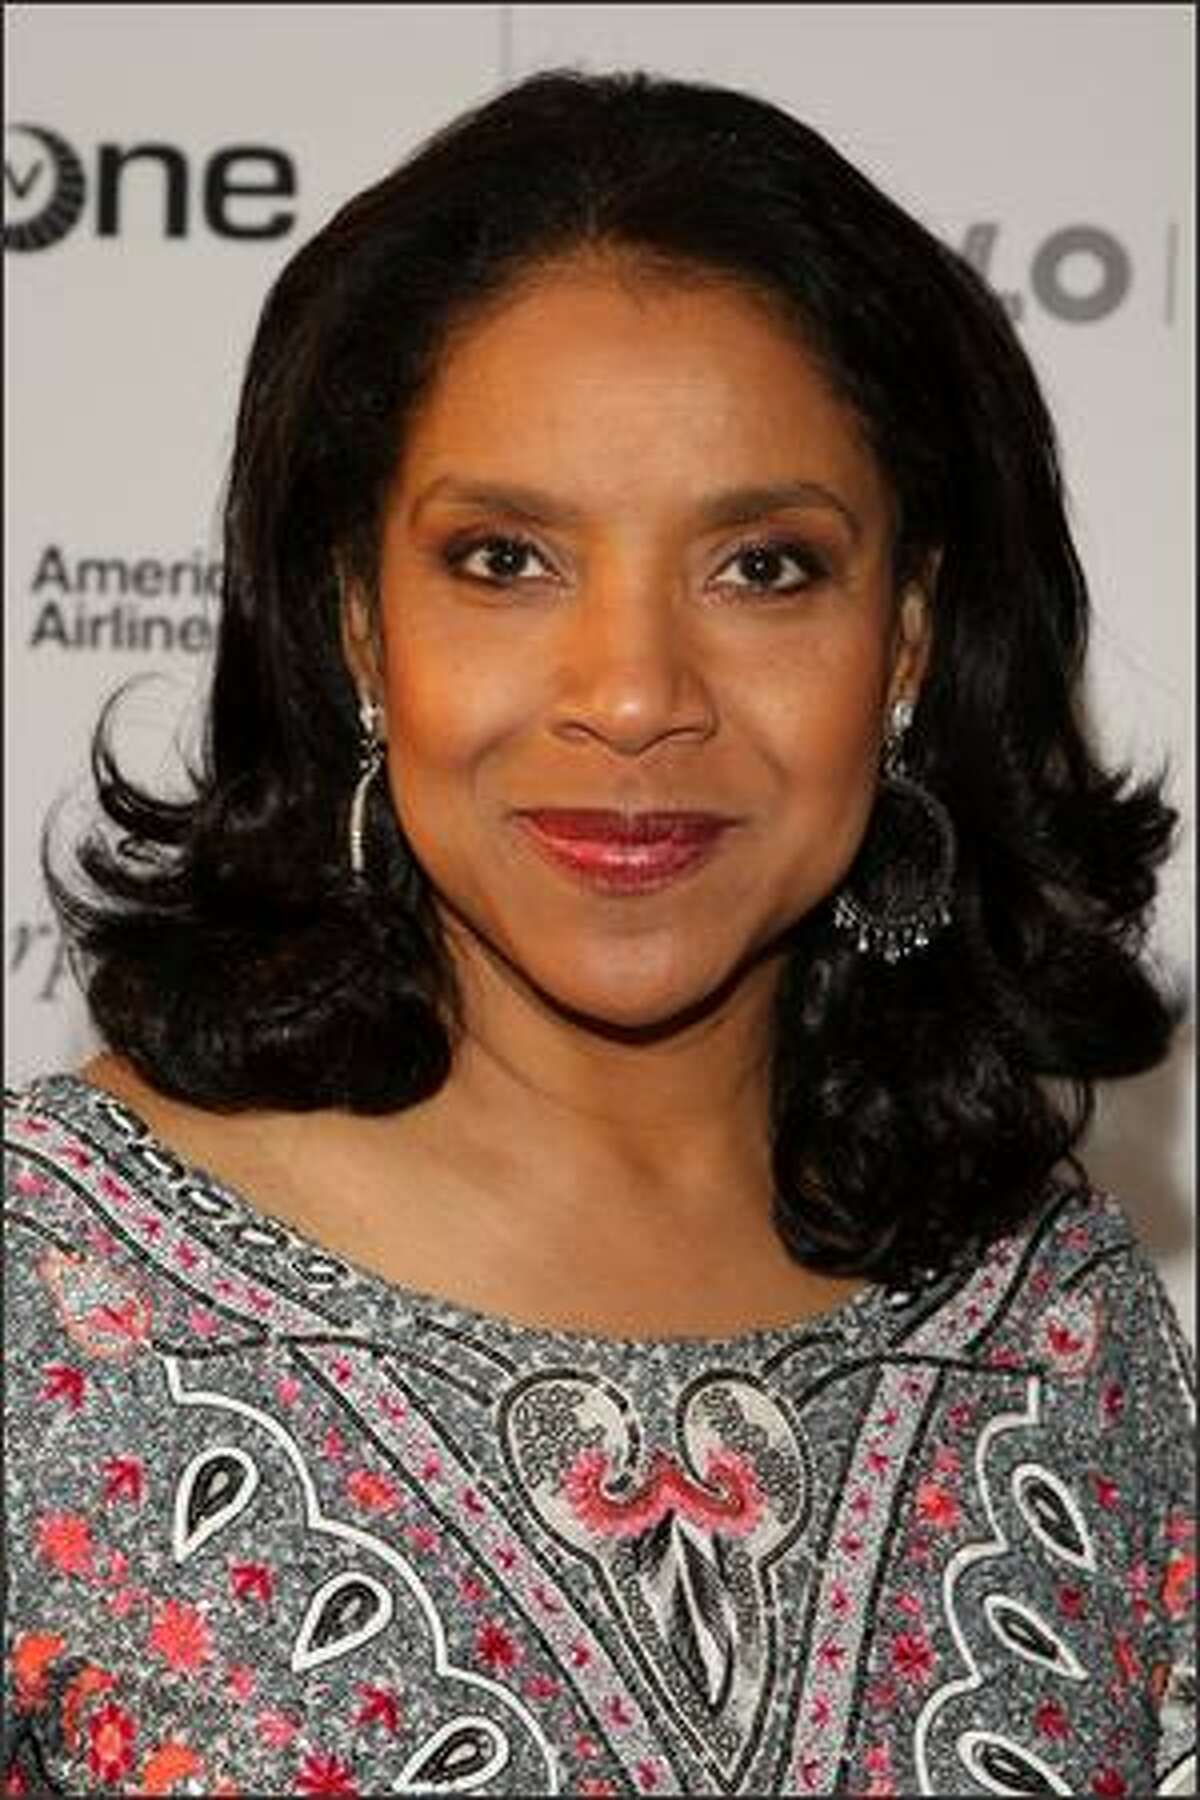 Actress Phylicia Rashad attends the Apollo Theater 75th Anniversary Gala at The Apollo Theater in New York City.